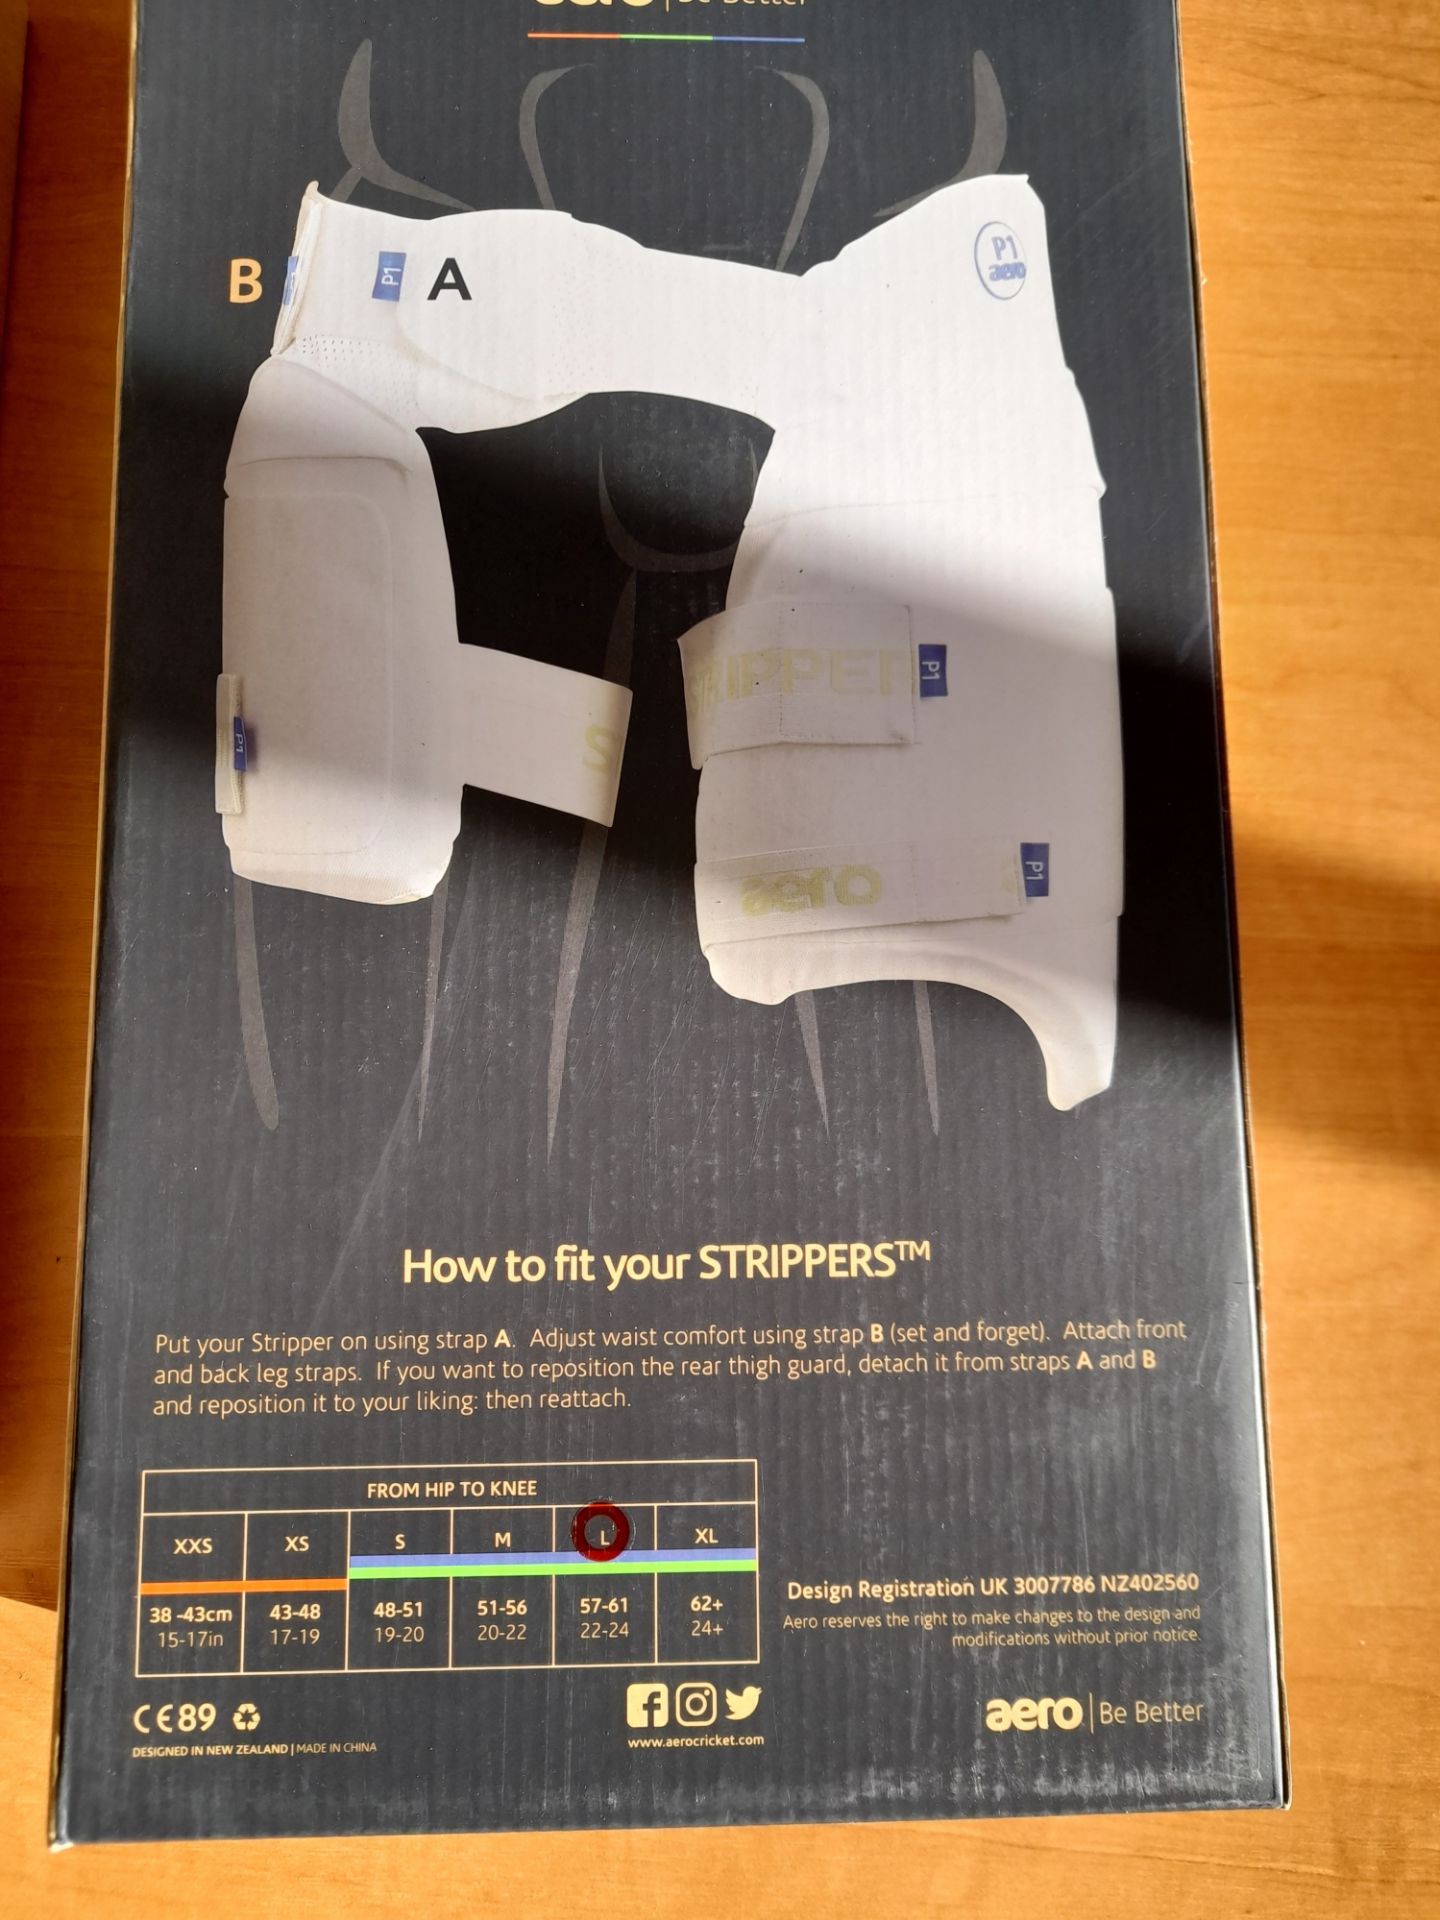 3 x Aero P2 Stripper Lower Body Protection R/H Large - Image 5 of 5